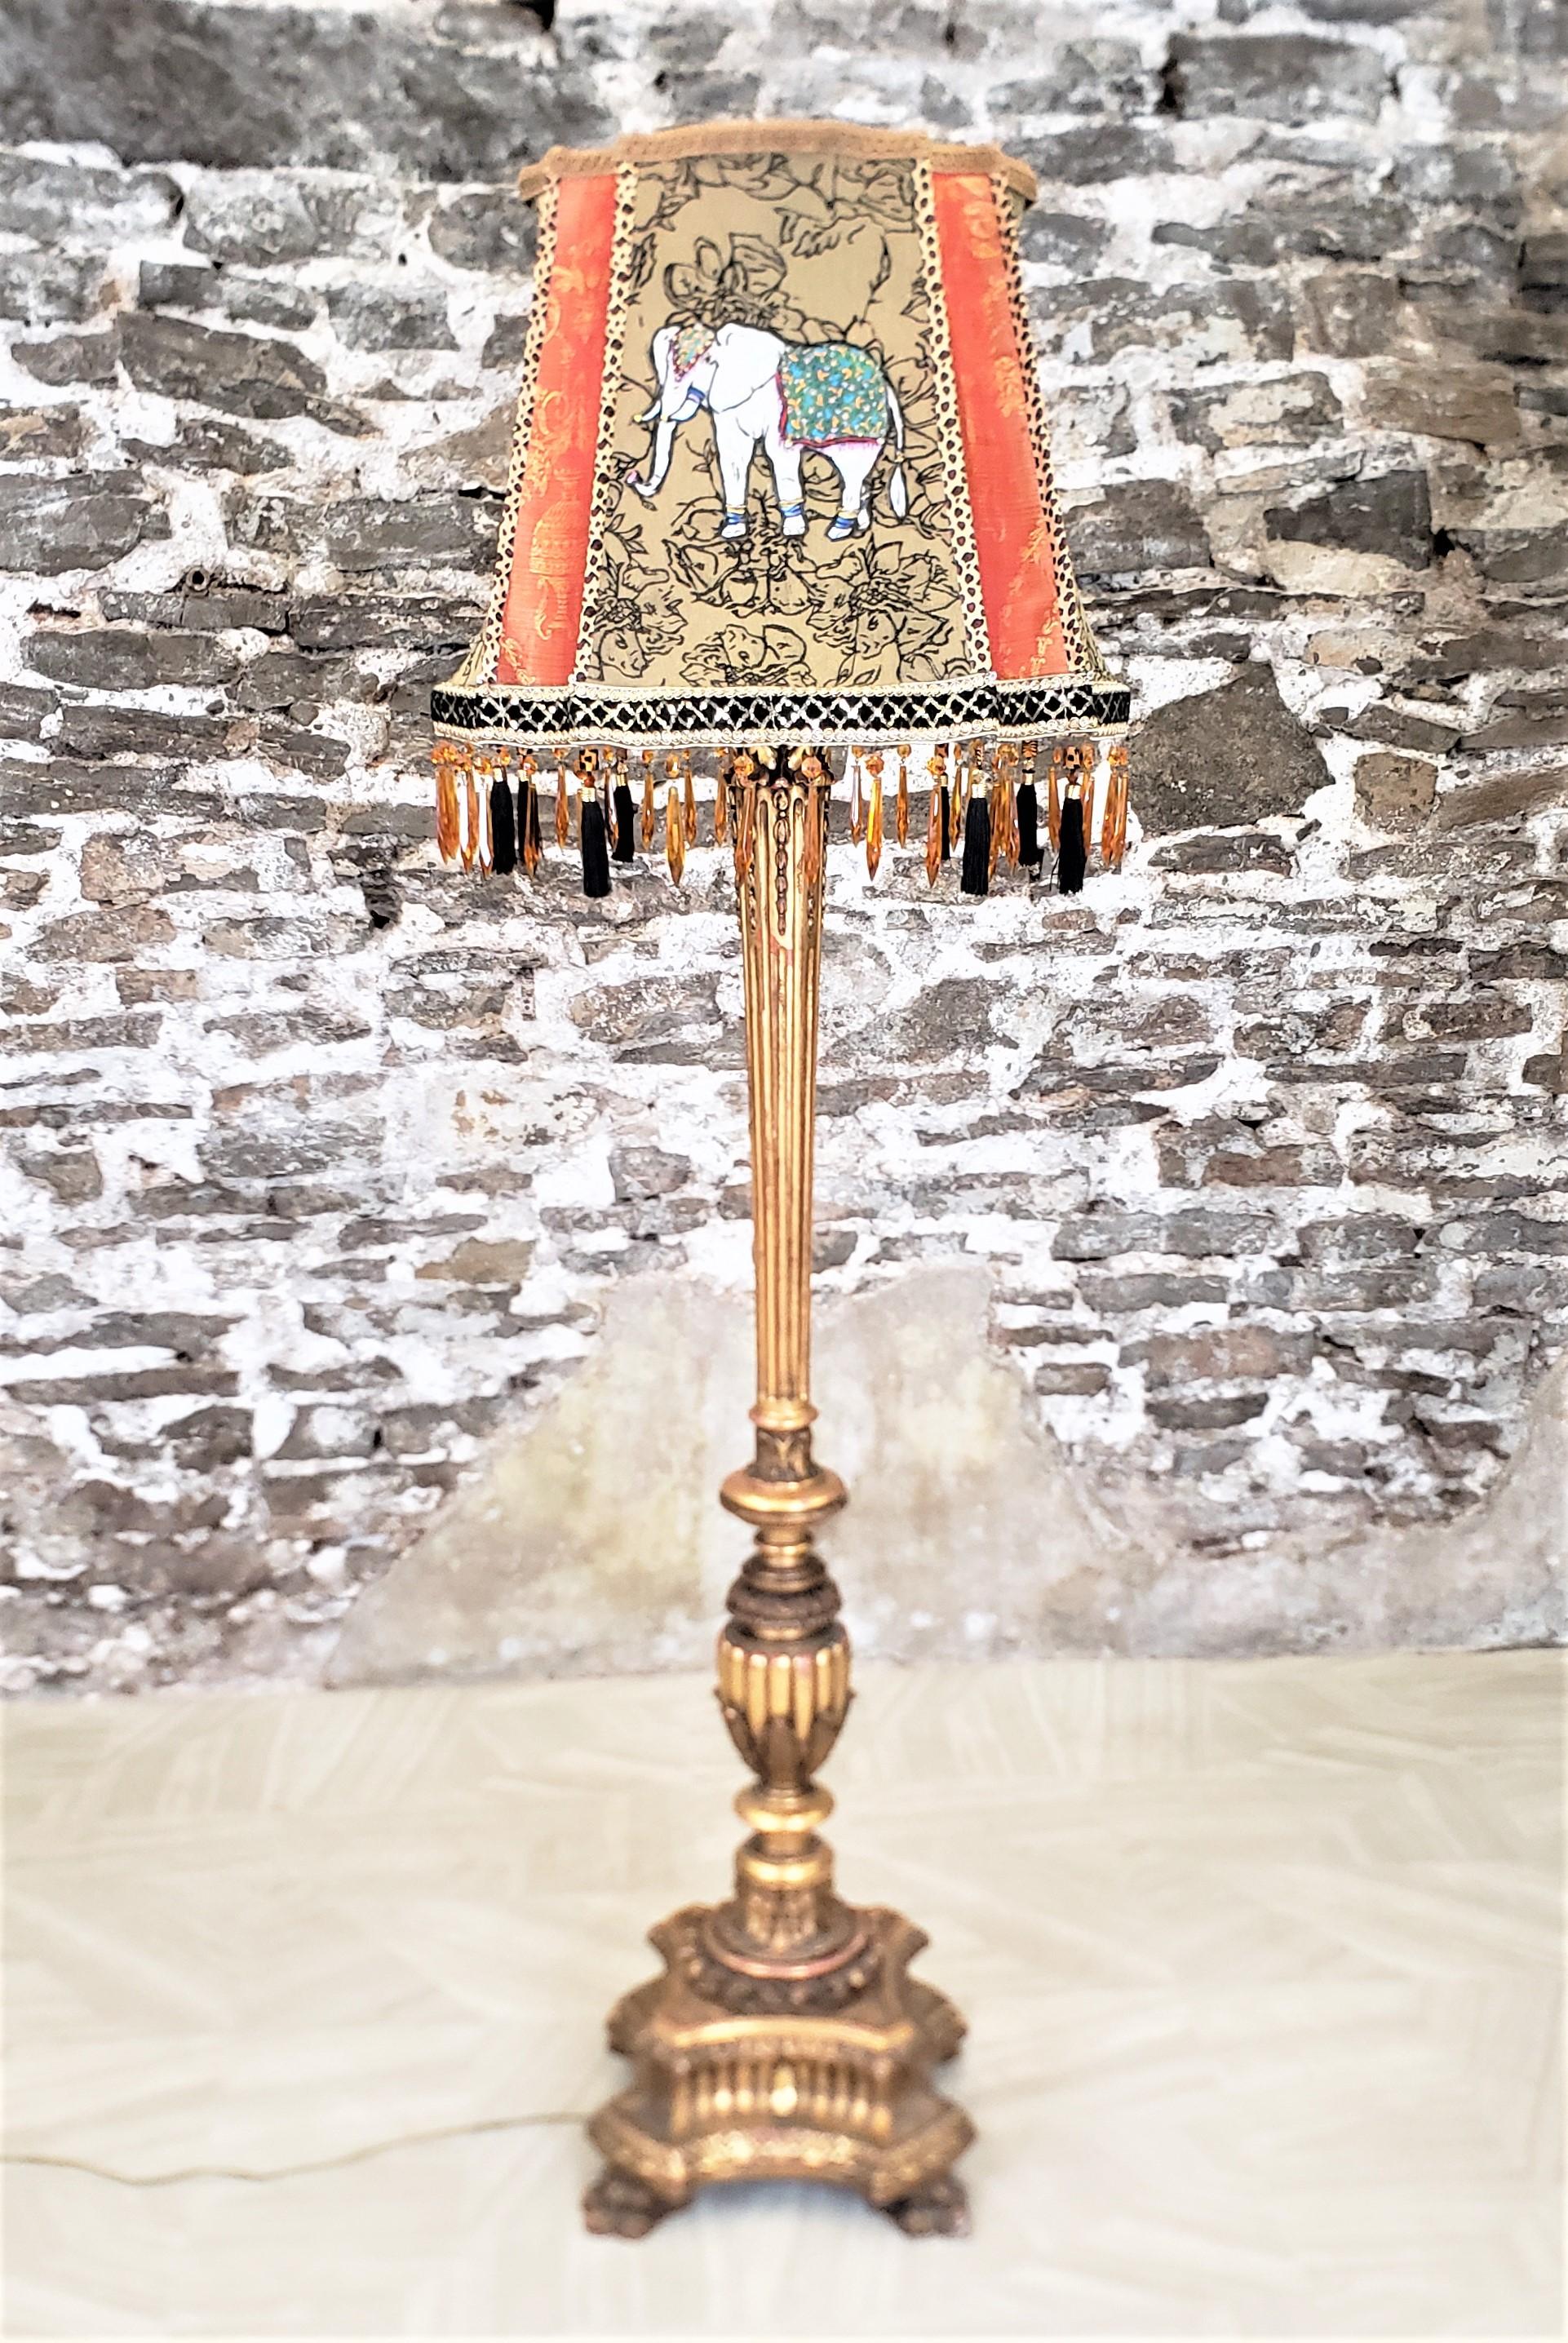 Classical Roman Antique Italian Florentine Hand-Carved & Gilt Finished Floor Lamp & Shade For Sale